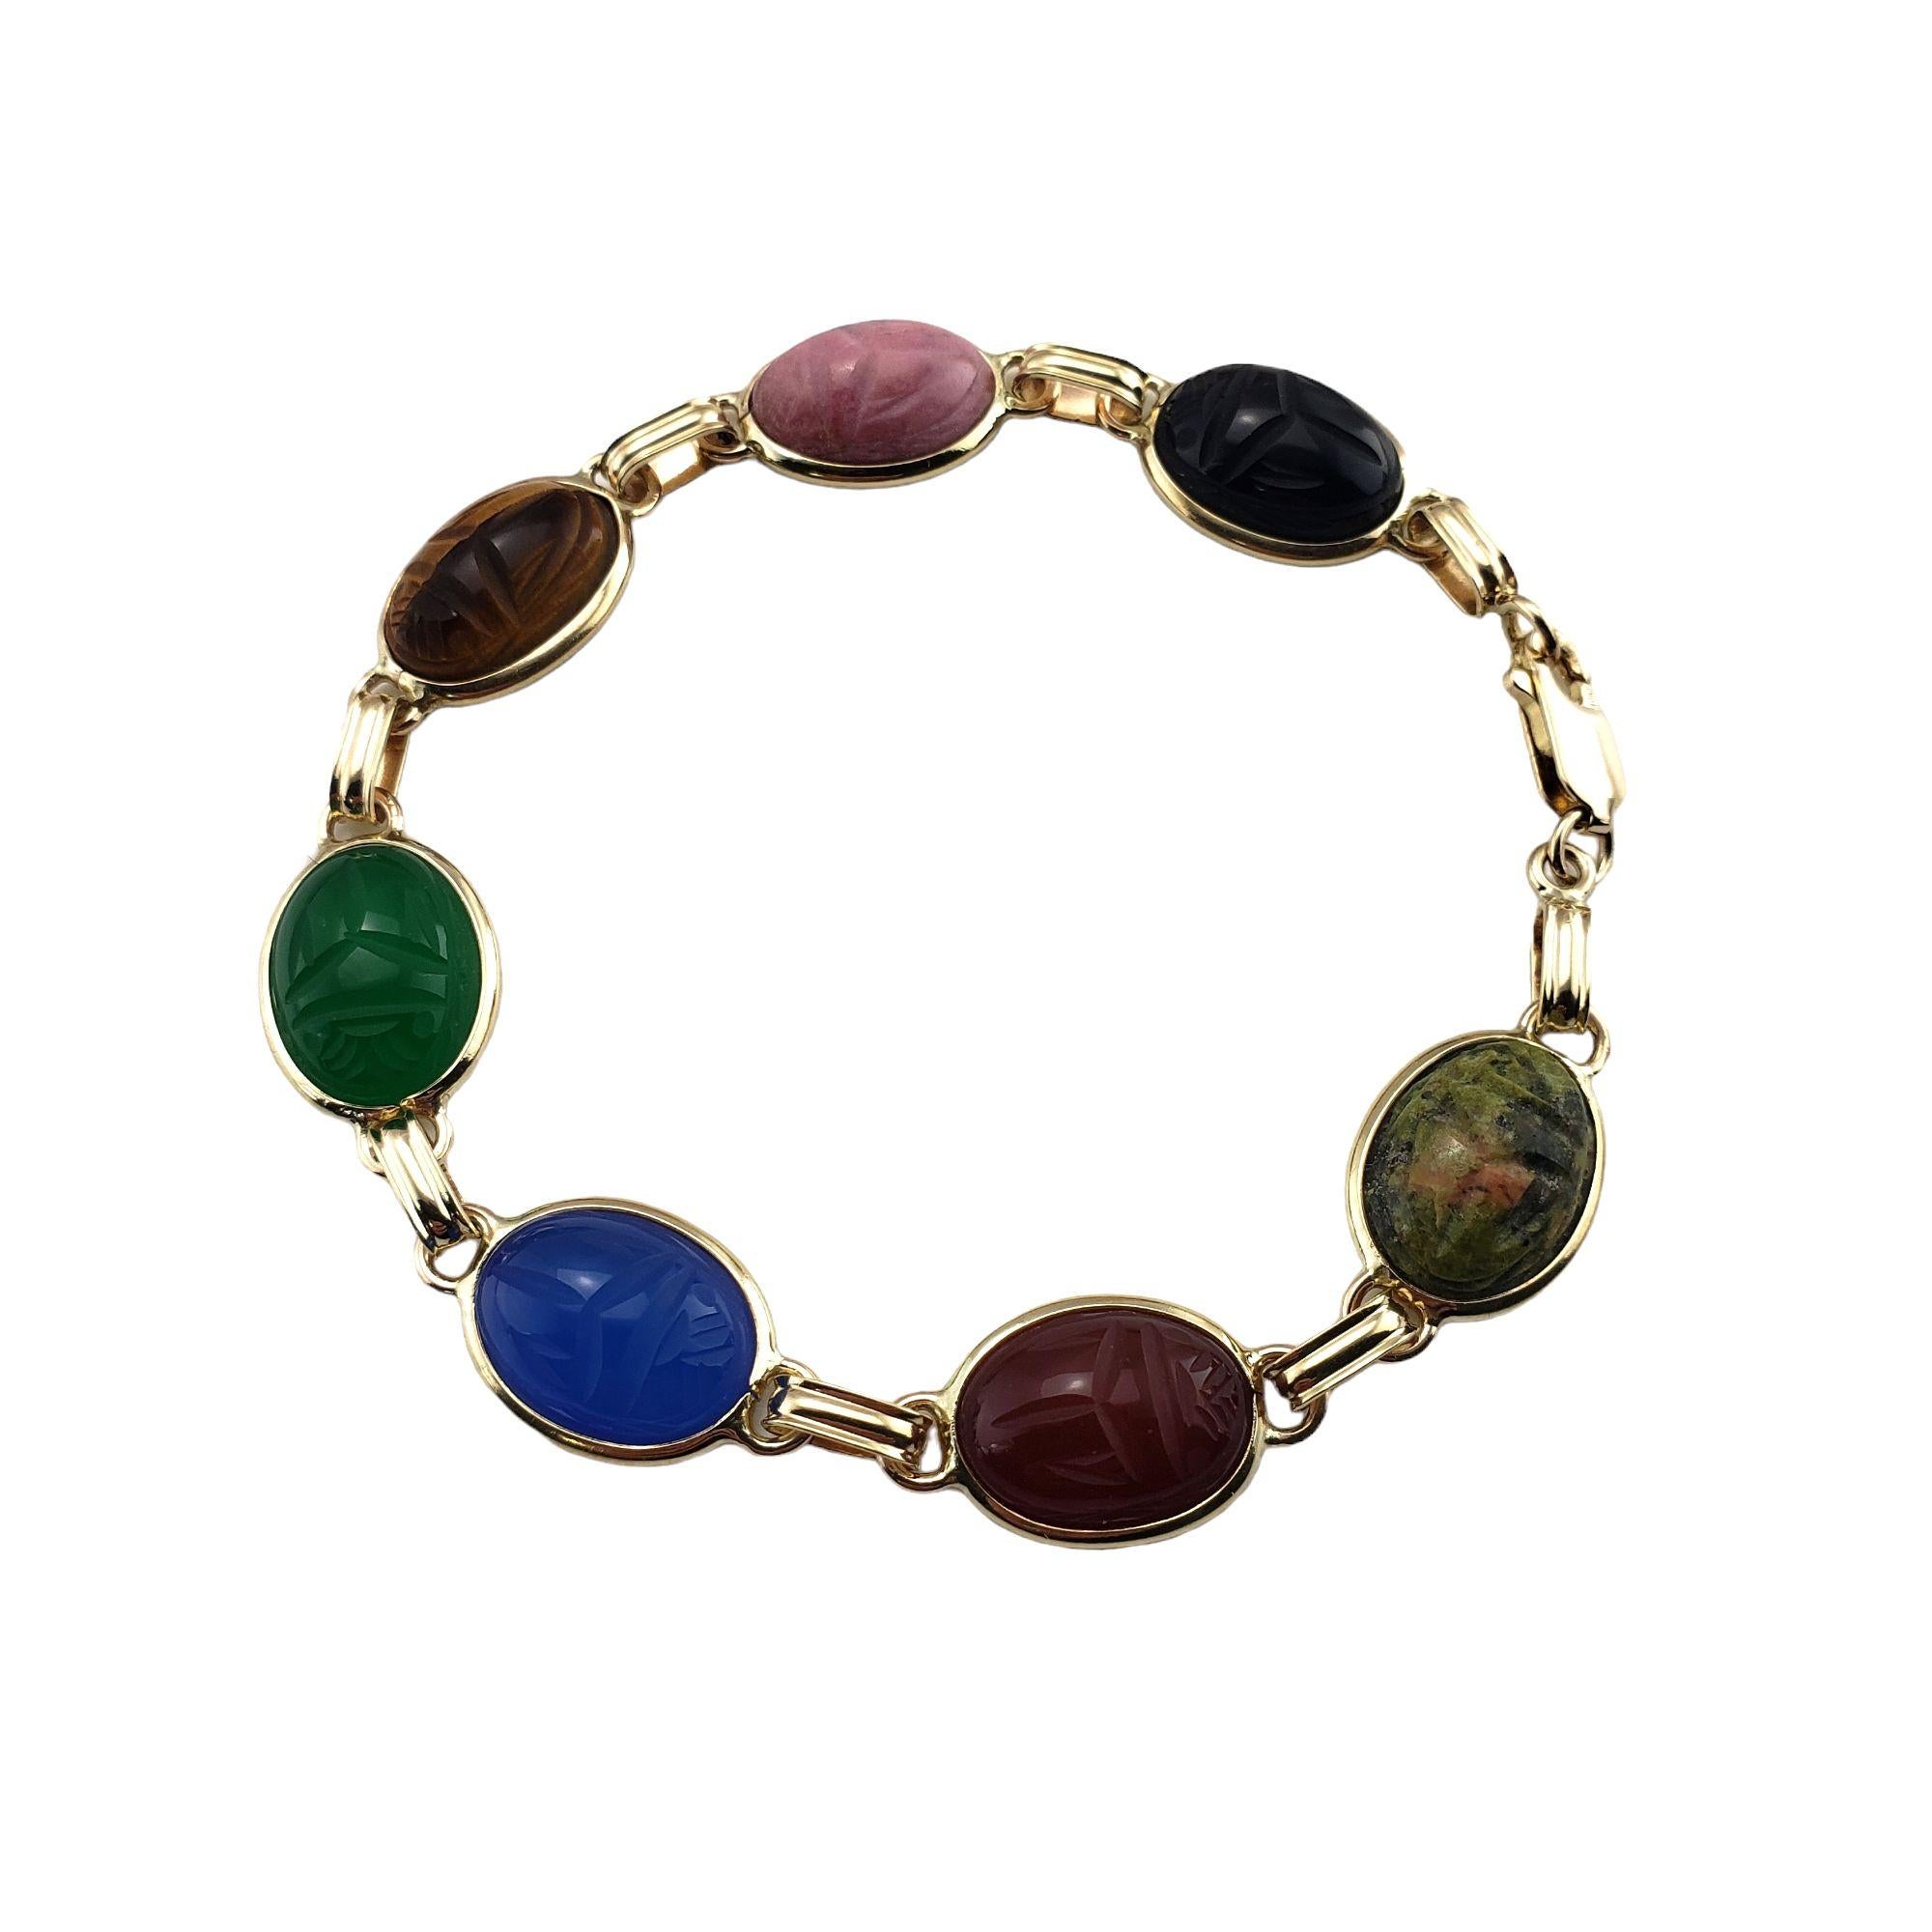 Vintage 10 Karat Yellow Gold Scarab Bracelet-

This lovely scarab bracelet features seven multicolored gemstones (13 mm x 8 mm) set in classic 10K yellow gold. Width: 11 mm.

Size: 7.5 inches

Weight: 7.8 dwt. / 12.1 gr.

Stamped: 10K

Very good